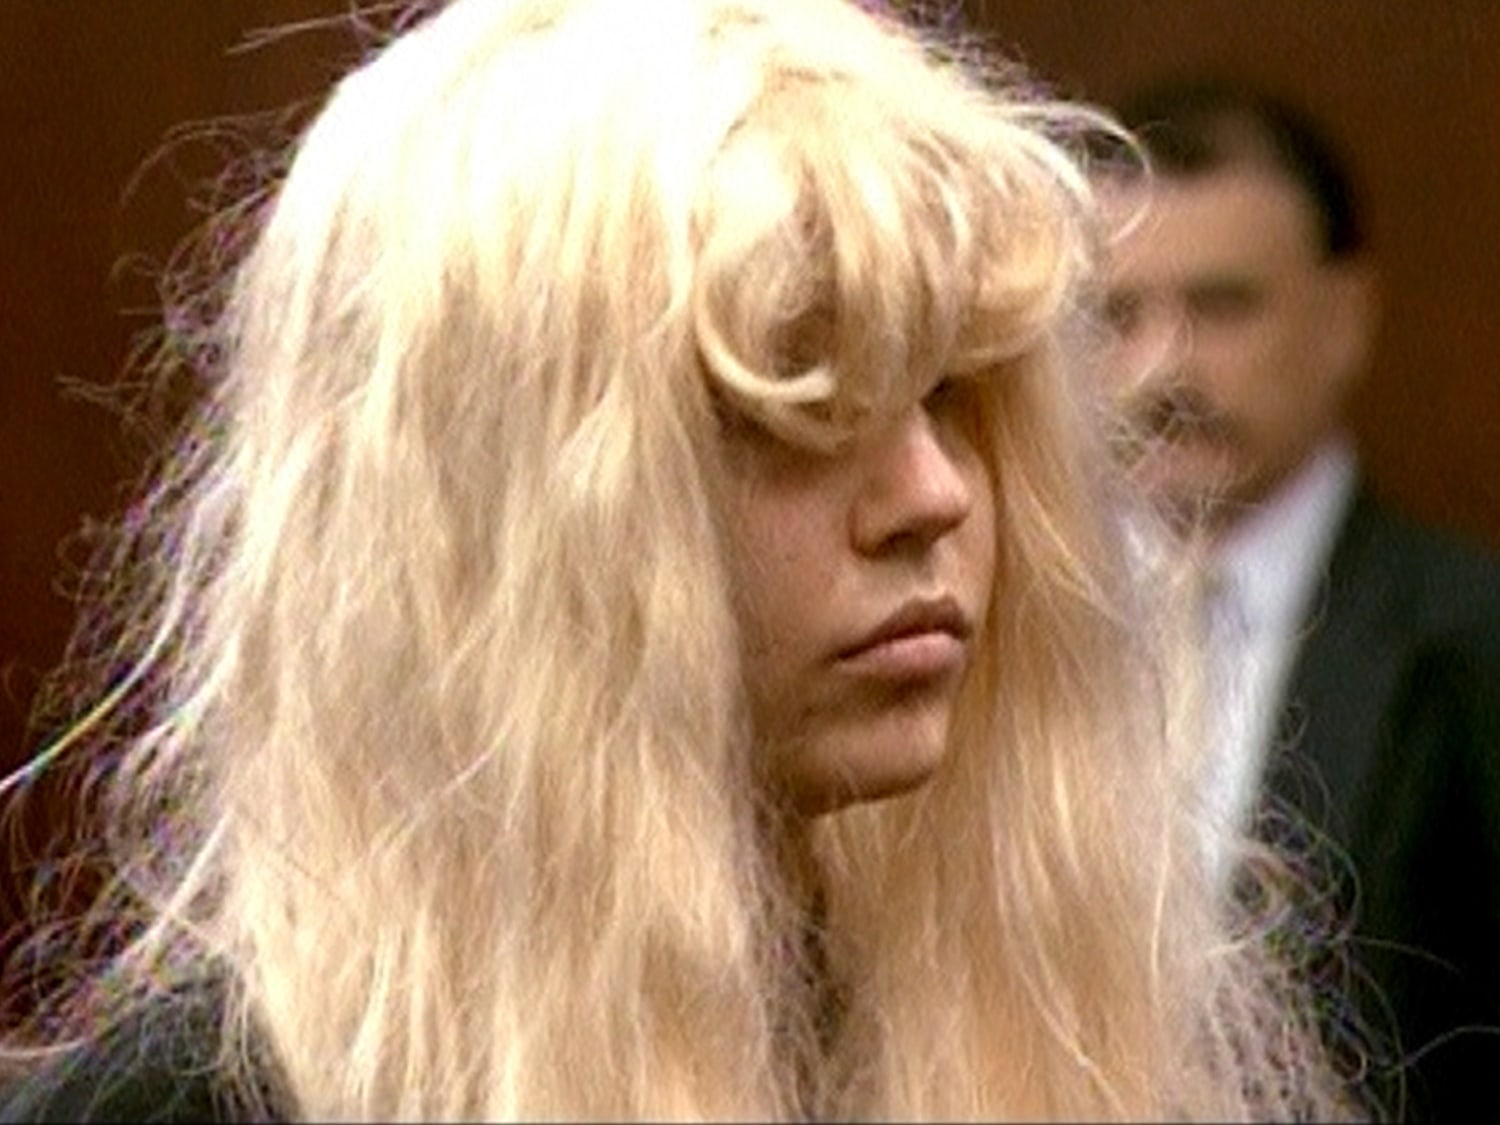 Celeb thrown in jail for wig